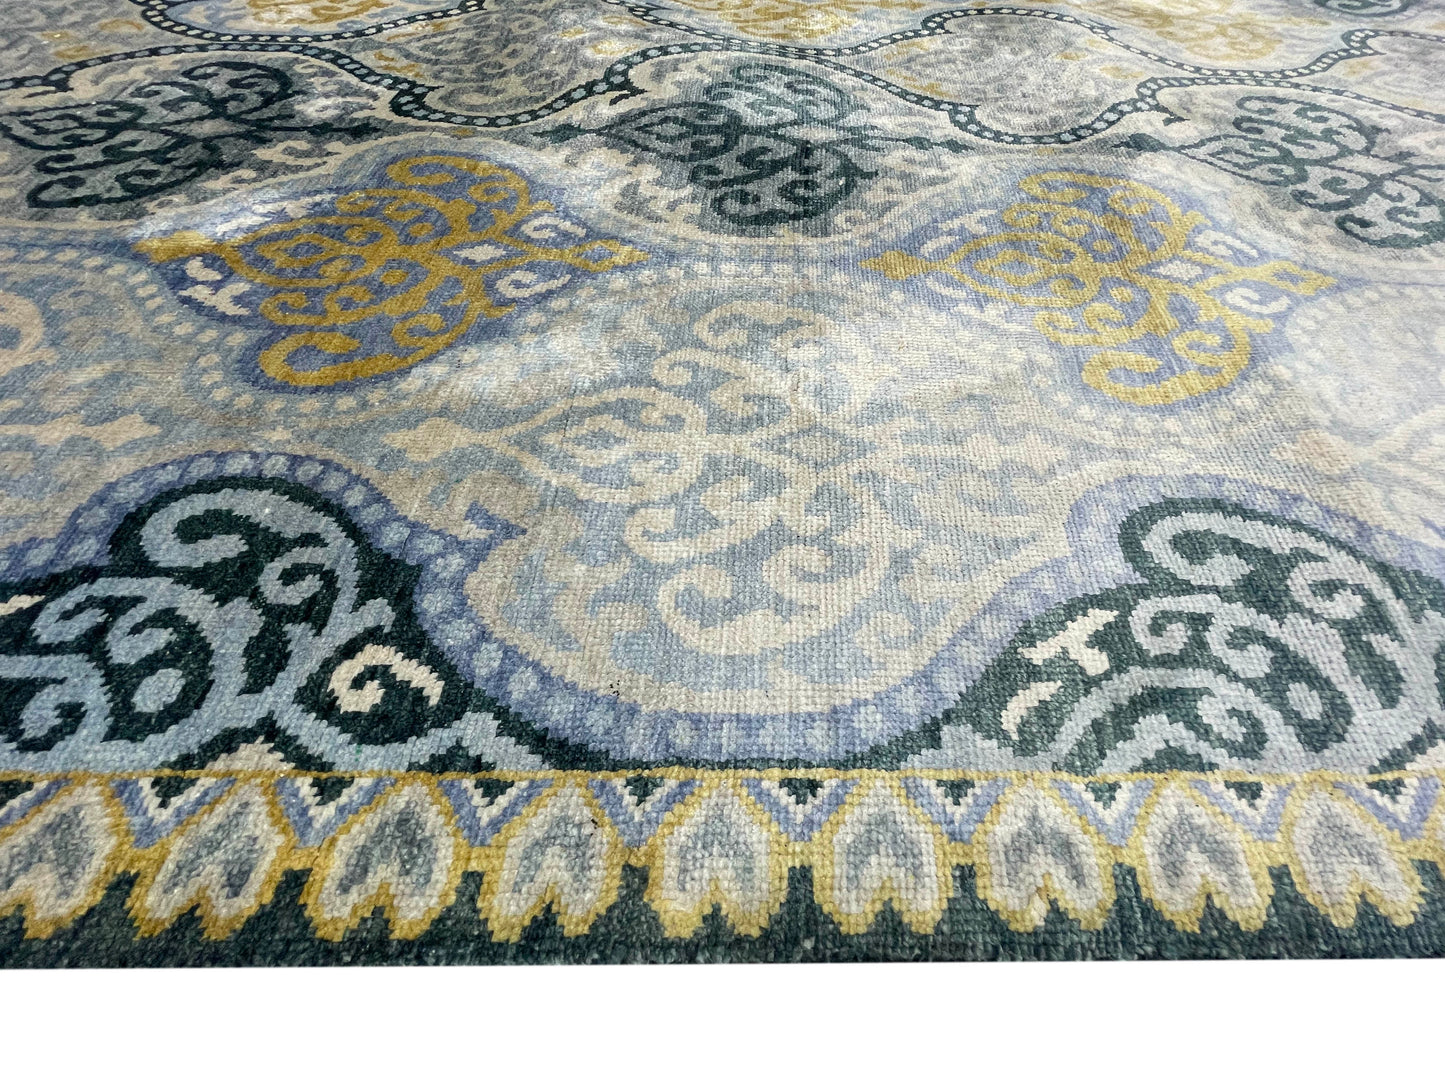 Get trendy with Blue and Grey Pure Silk Transitional Area Handknotted Rug 7.11x10.3ft 240x313Cms - Contemporary Rugs available at Jaipur Oriental Rugs. Grab yours for $5845.00 today!